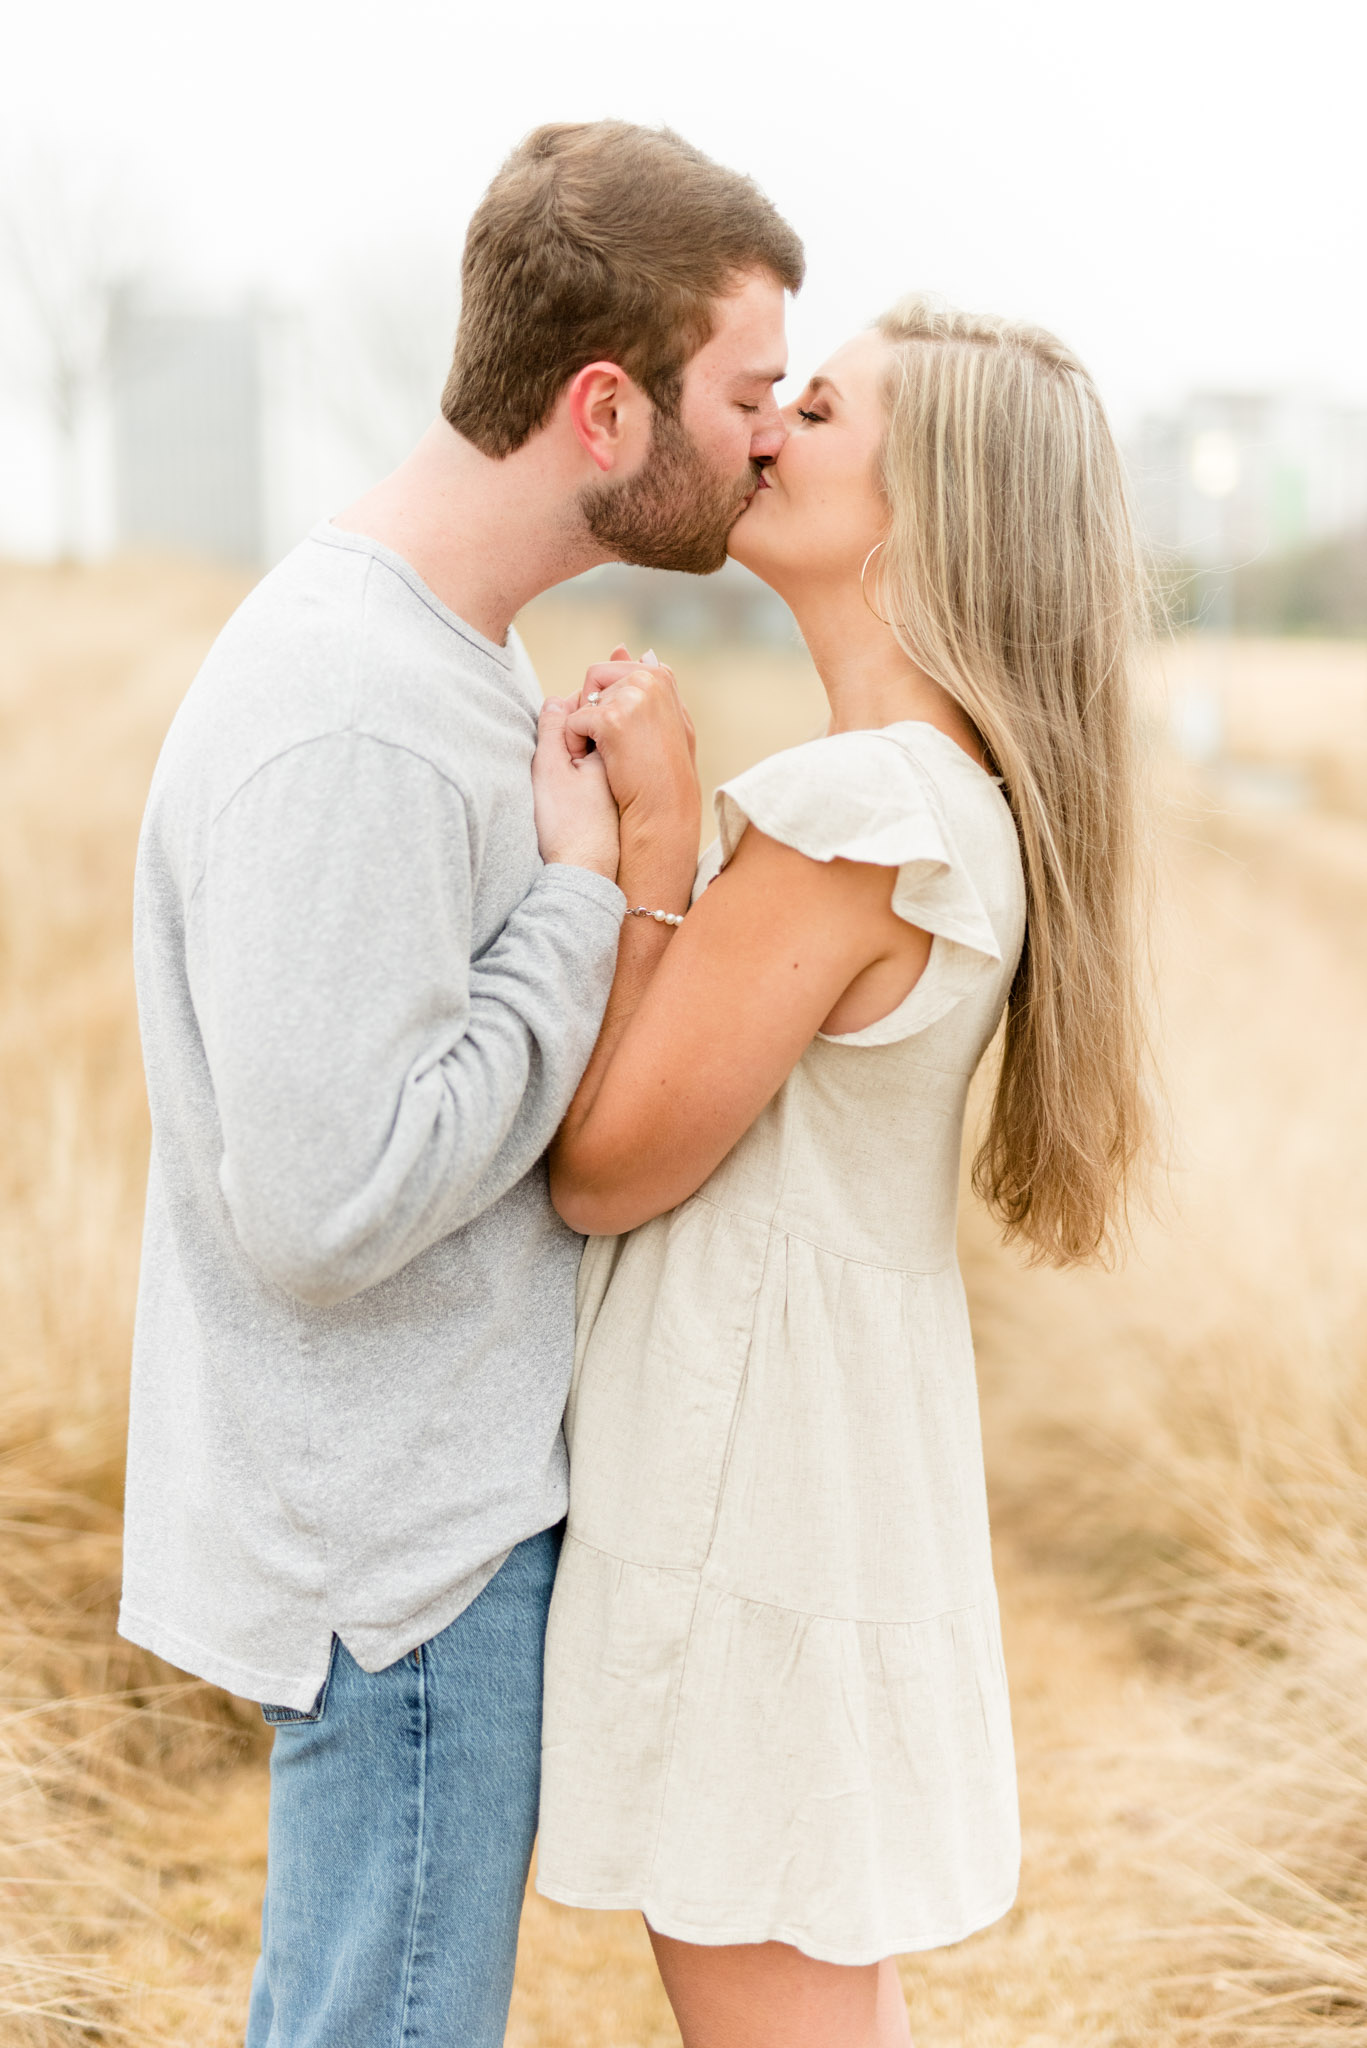 Couple hold hands and kiss in field.